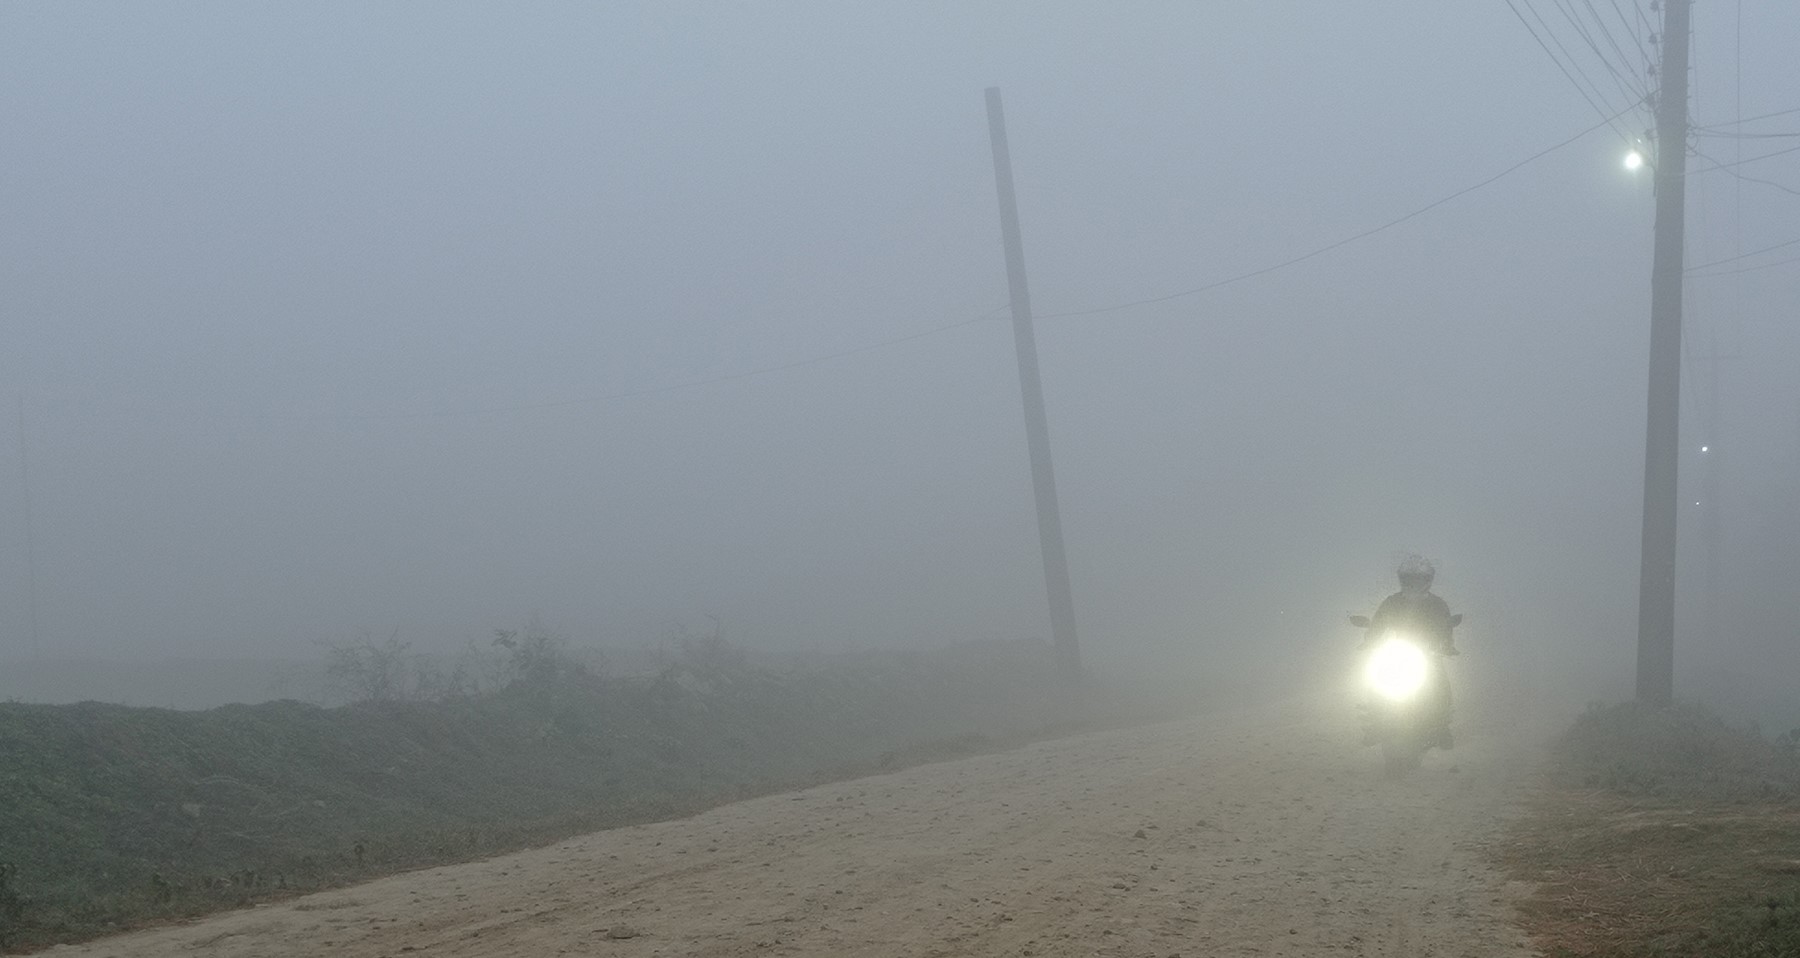 Dense fog in Terai likely to disrupt transport services